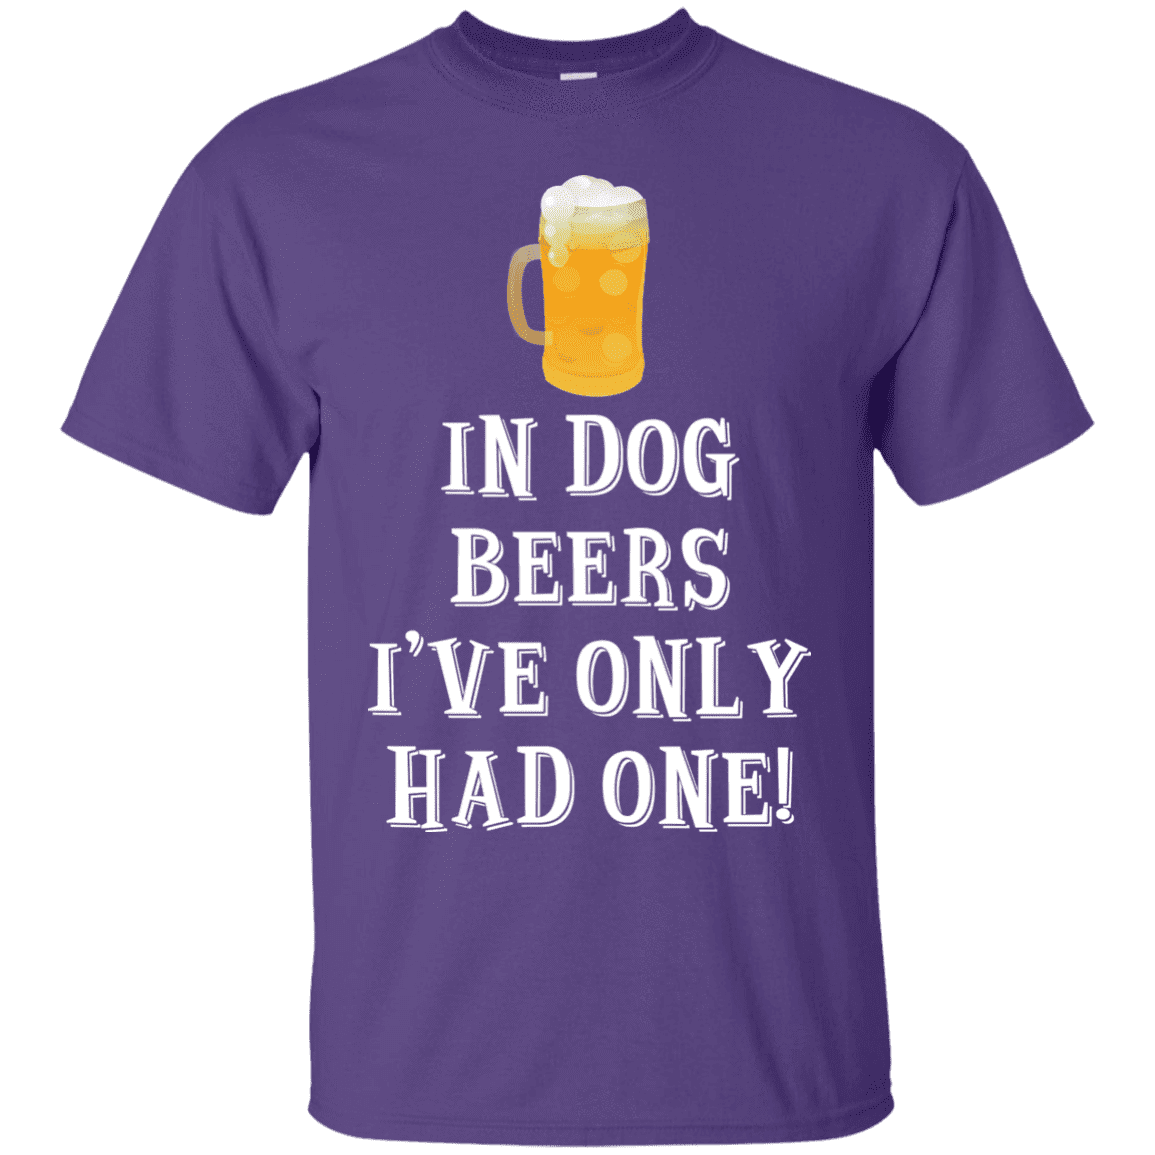 In Dog Beers I've Only Had One - T Shirt.